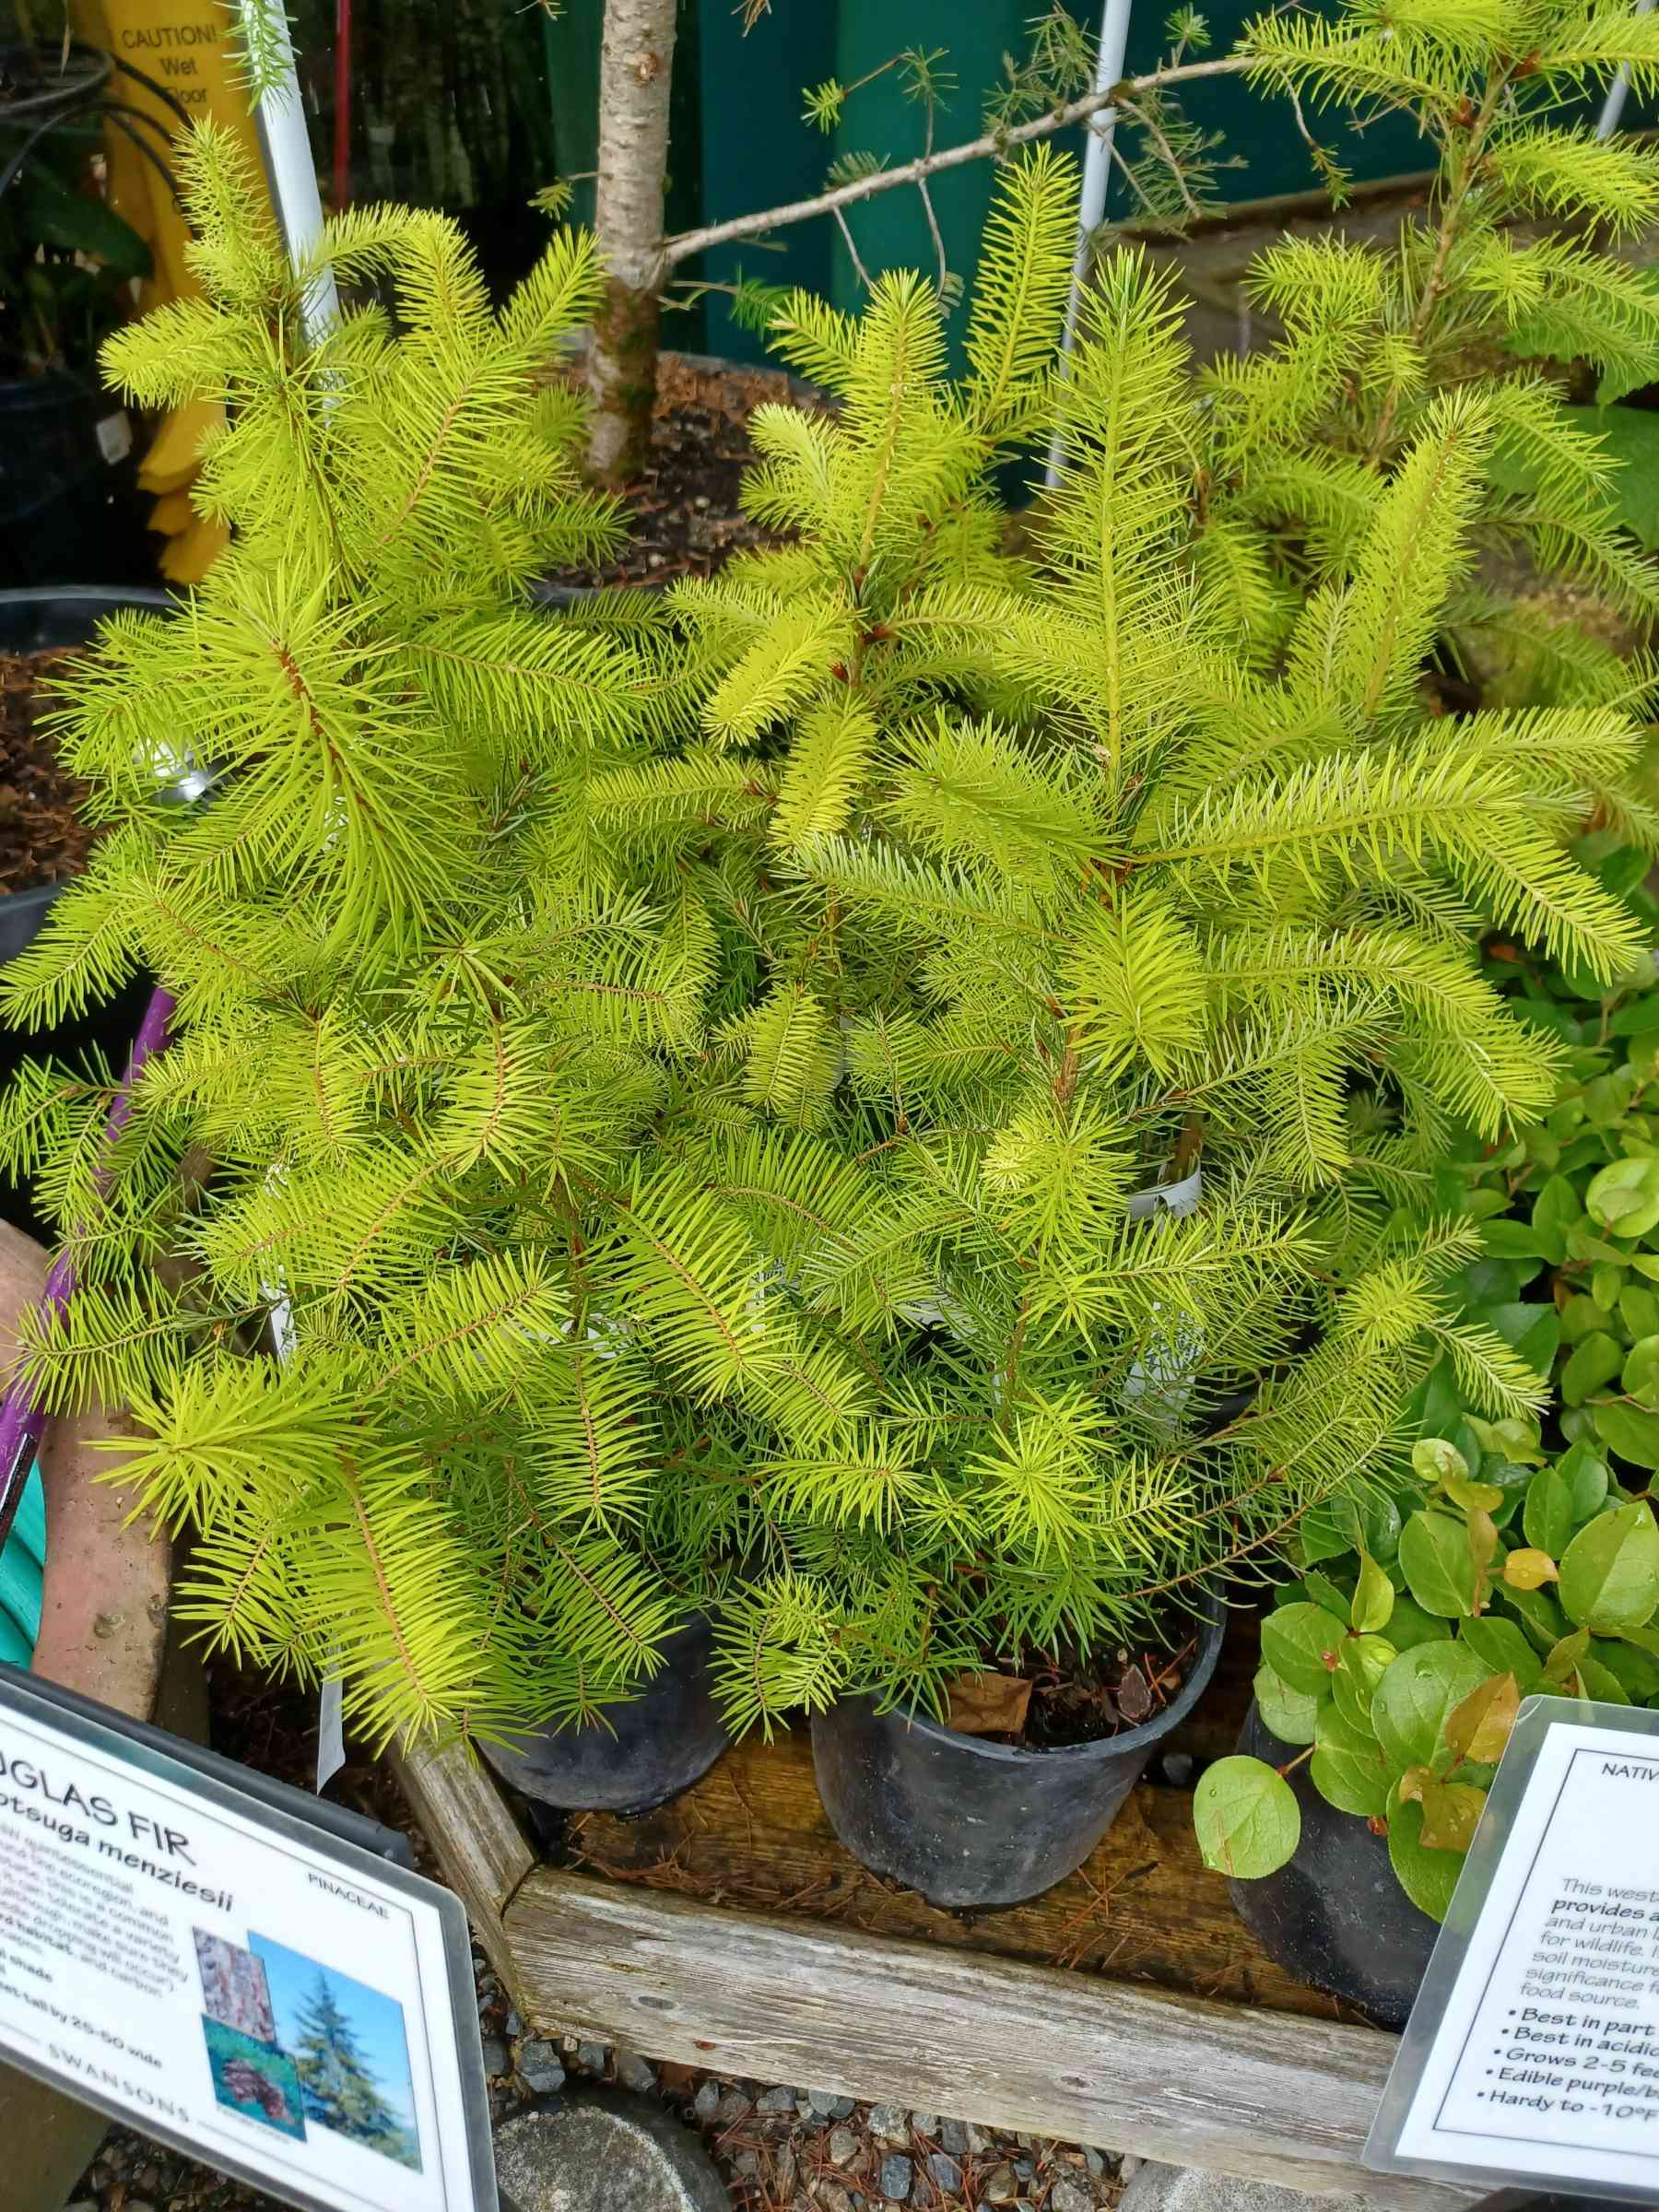 Pseudotsuga menziesii growing in 1-gallon containers at a nursery near Seattle, Washington.